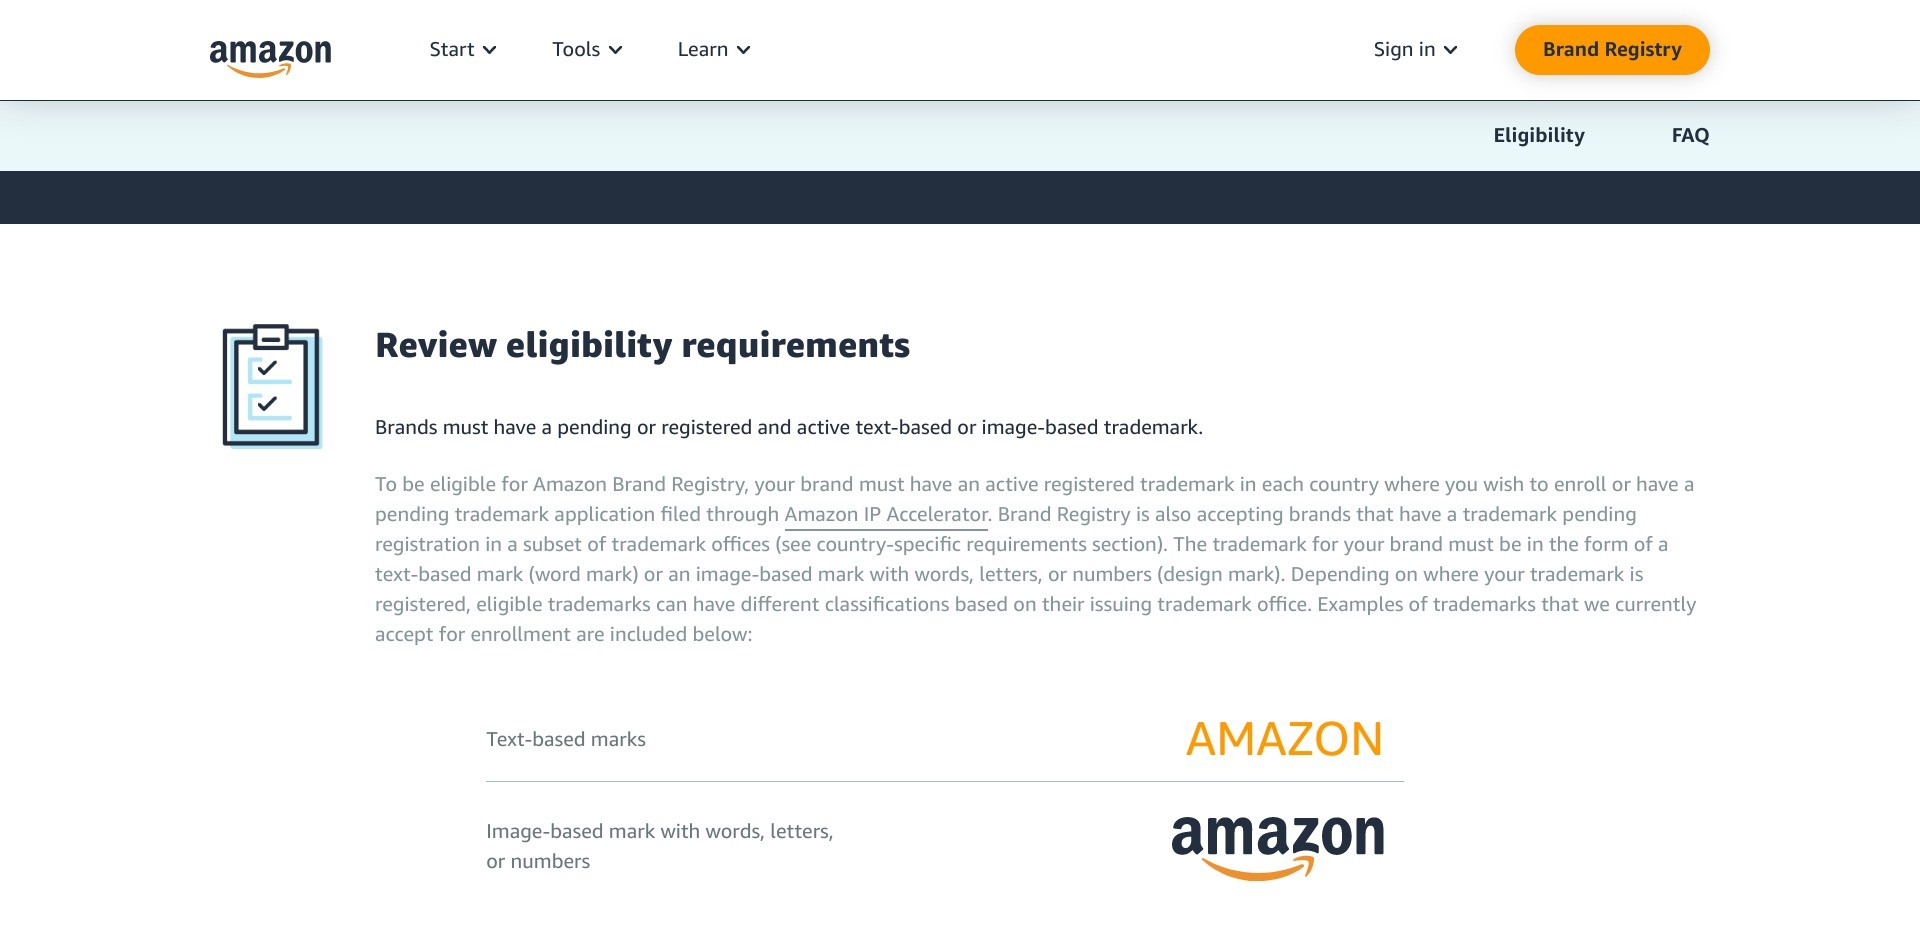 Screenshot of https://brandservices.amazon.com/brandregistry/eligibility displaying the eligibility criteria of Amazon’s Brand Registry